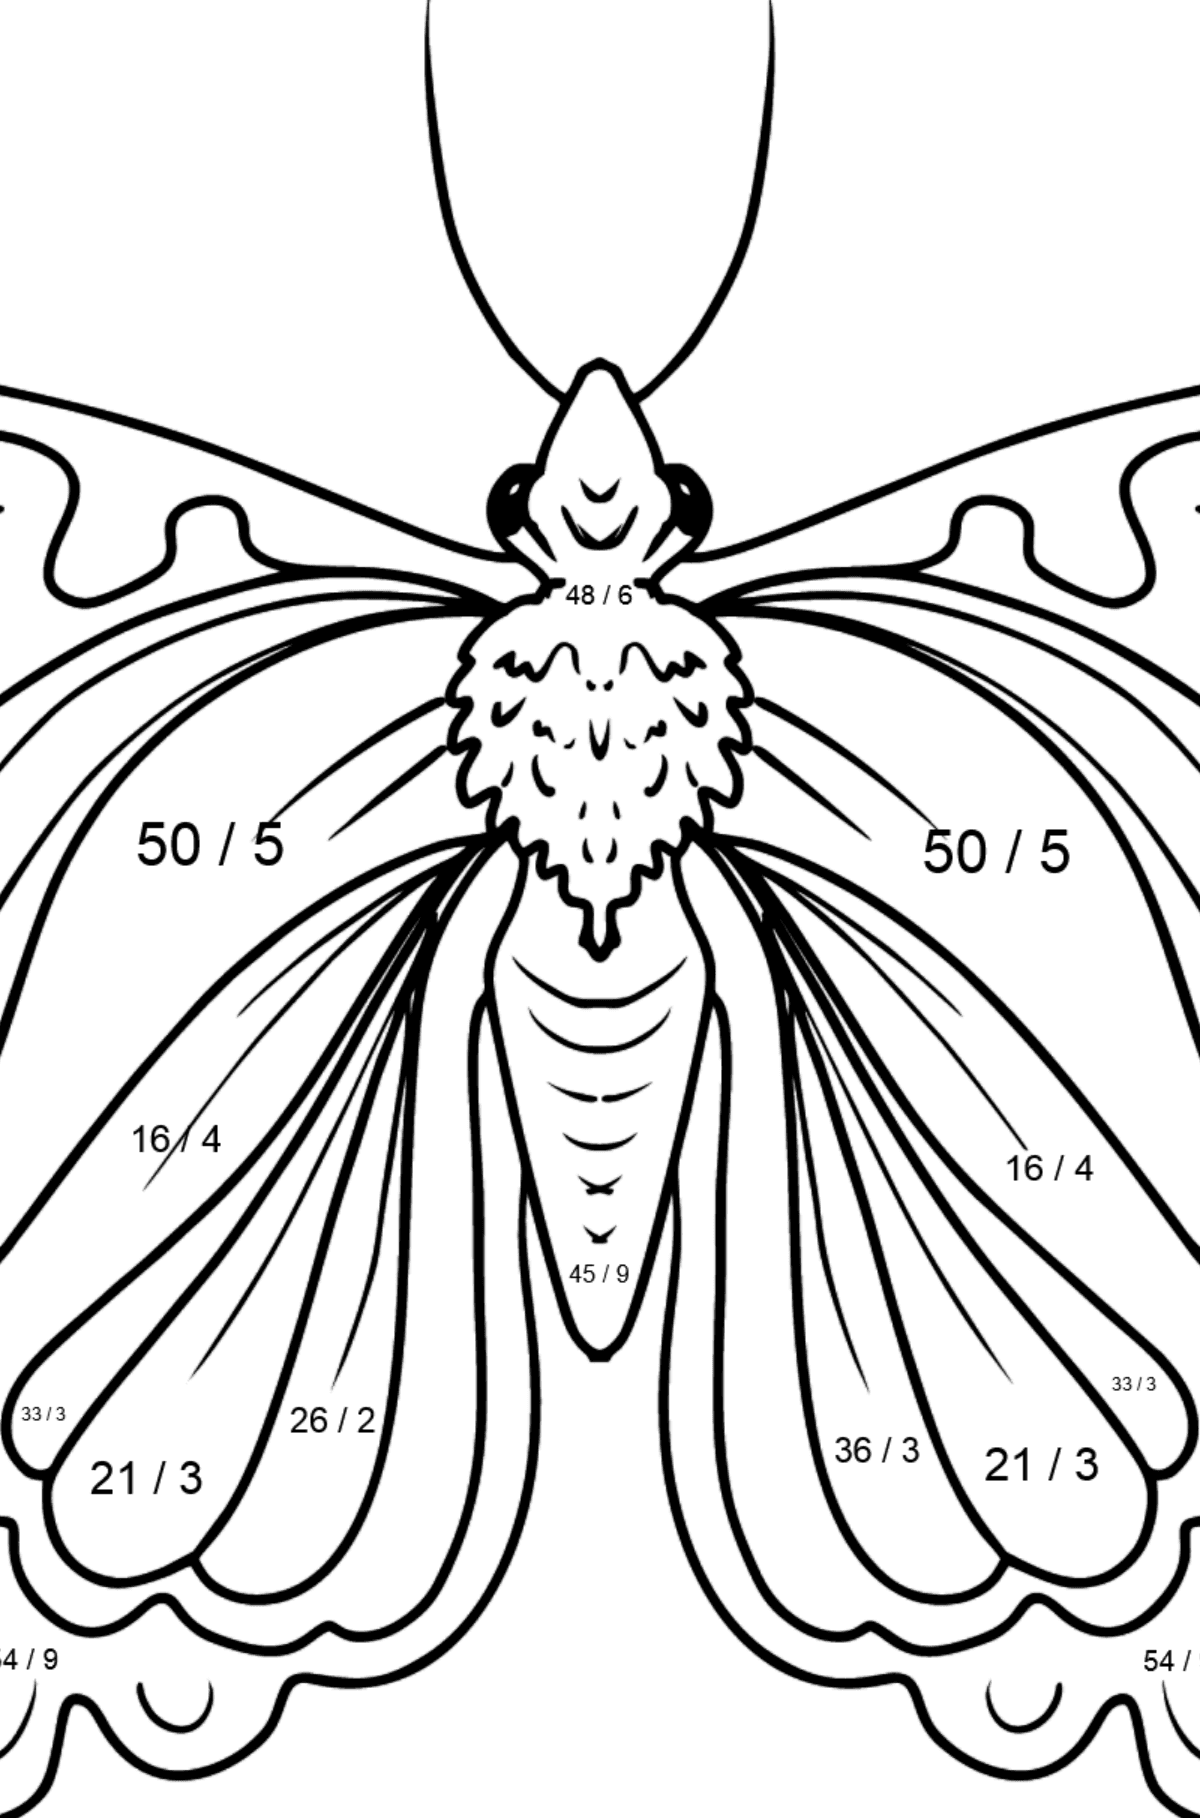 Cute Butterfly coloring page - Math Coloring - Division for Kids